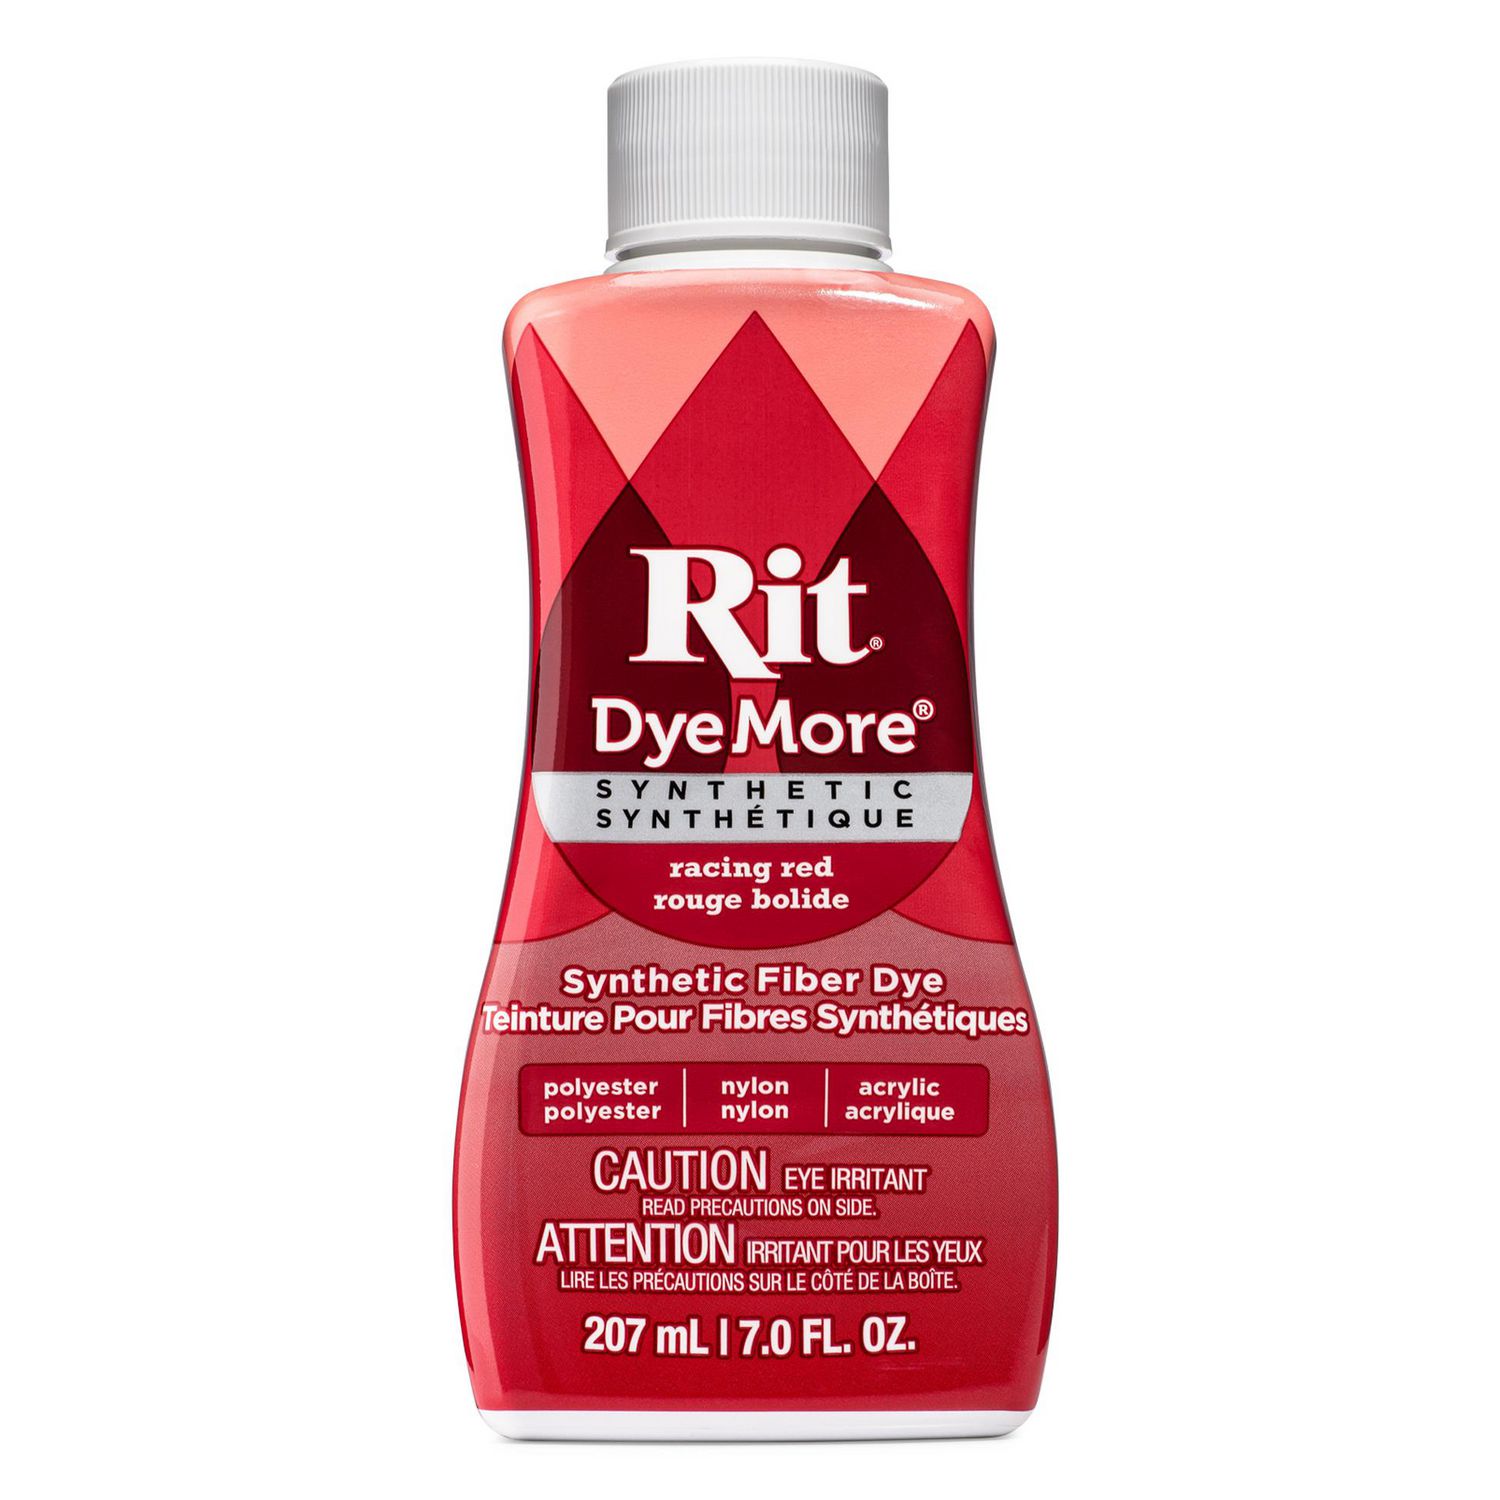 How to Tie-Dye a Slip Dress with Rit DyeMore